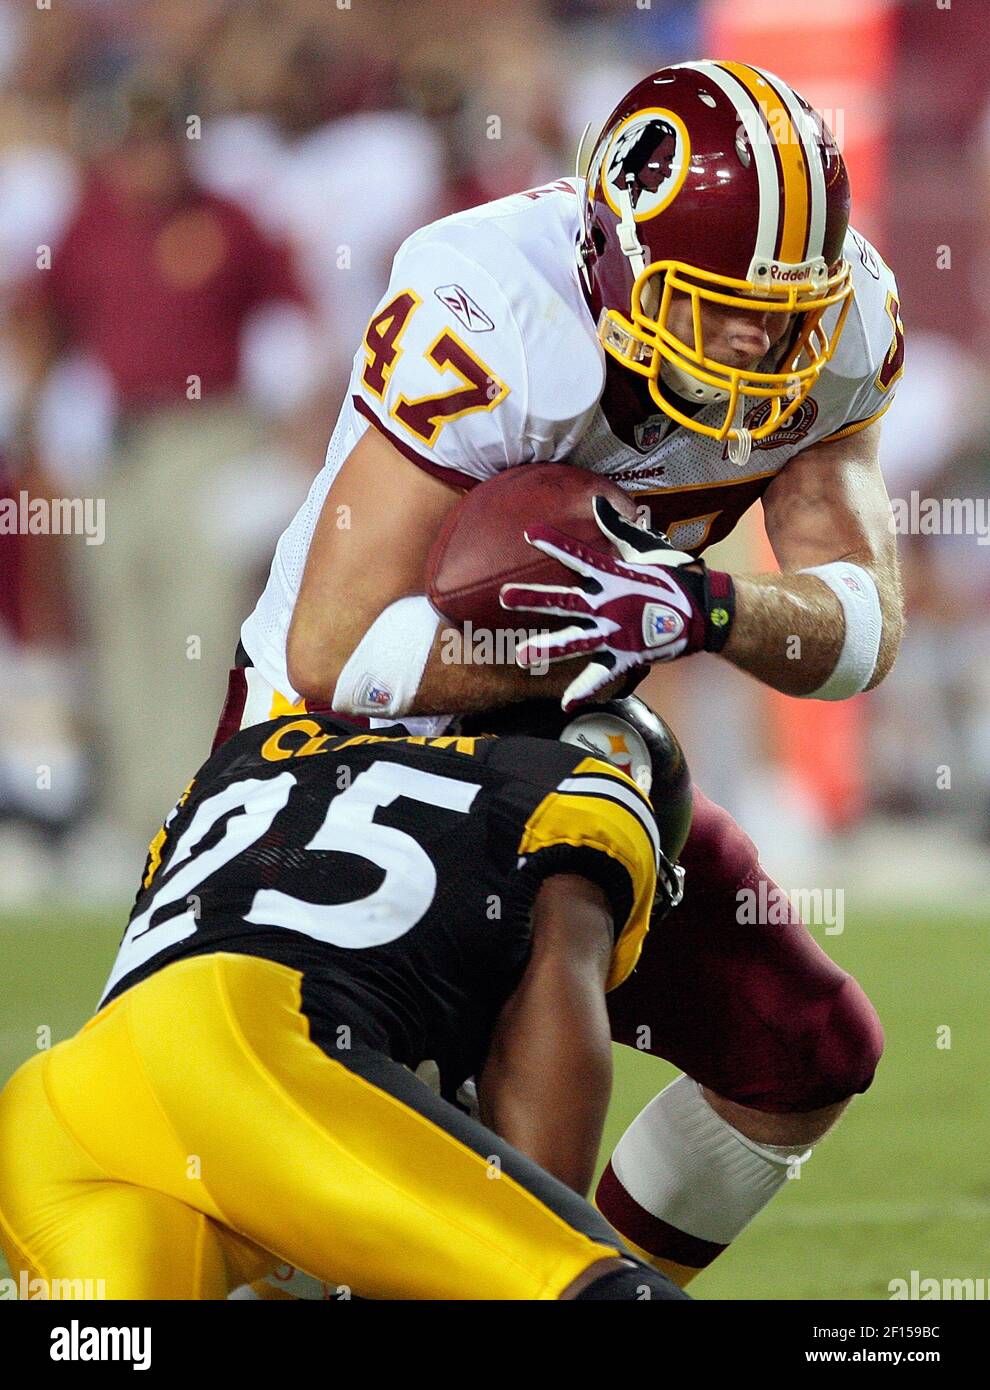 Washington Redskins Chris Cooley (47) is hit hard by Pittsburgh Steelers  Ryan Clark (25) during their preseason football game played at FedEx Field  in Landover, MD, Saturday, August 18, 2007. (Photo by